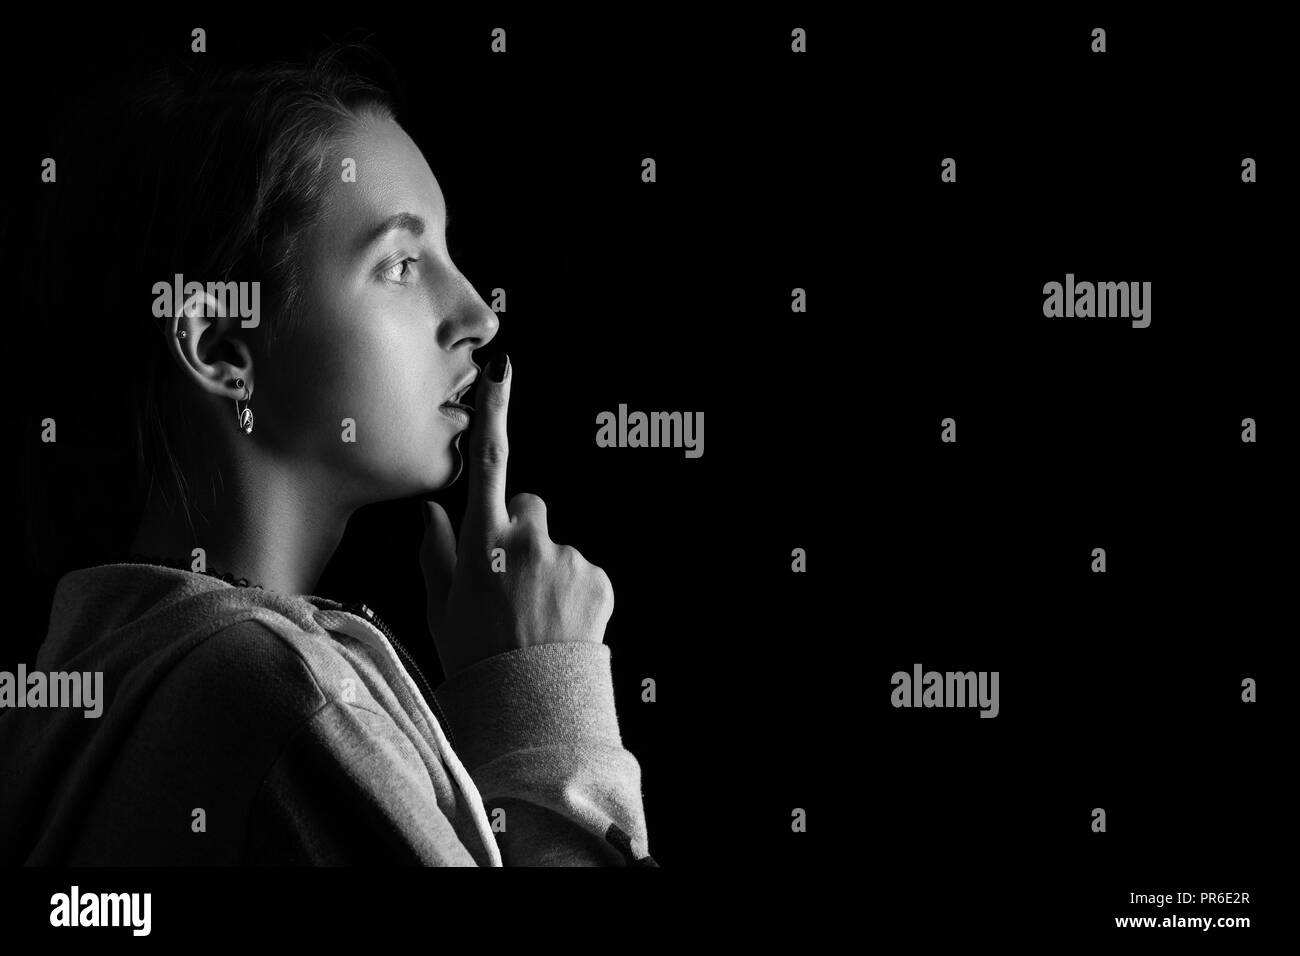 scared girl show silence gesture on black background with copy space, monochrome Stock Photo